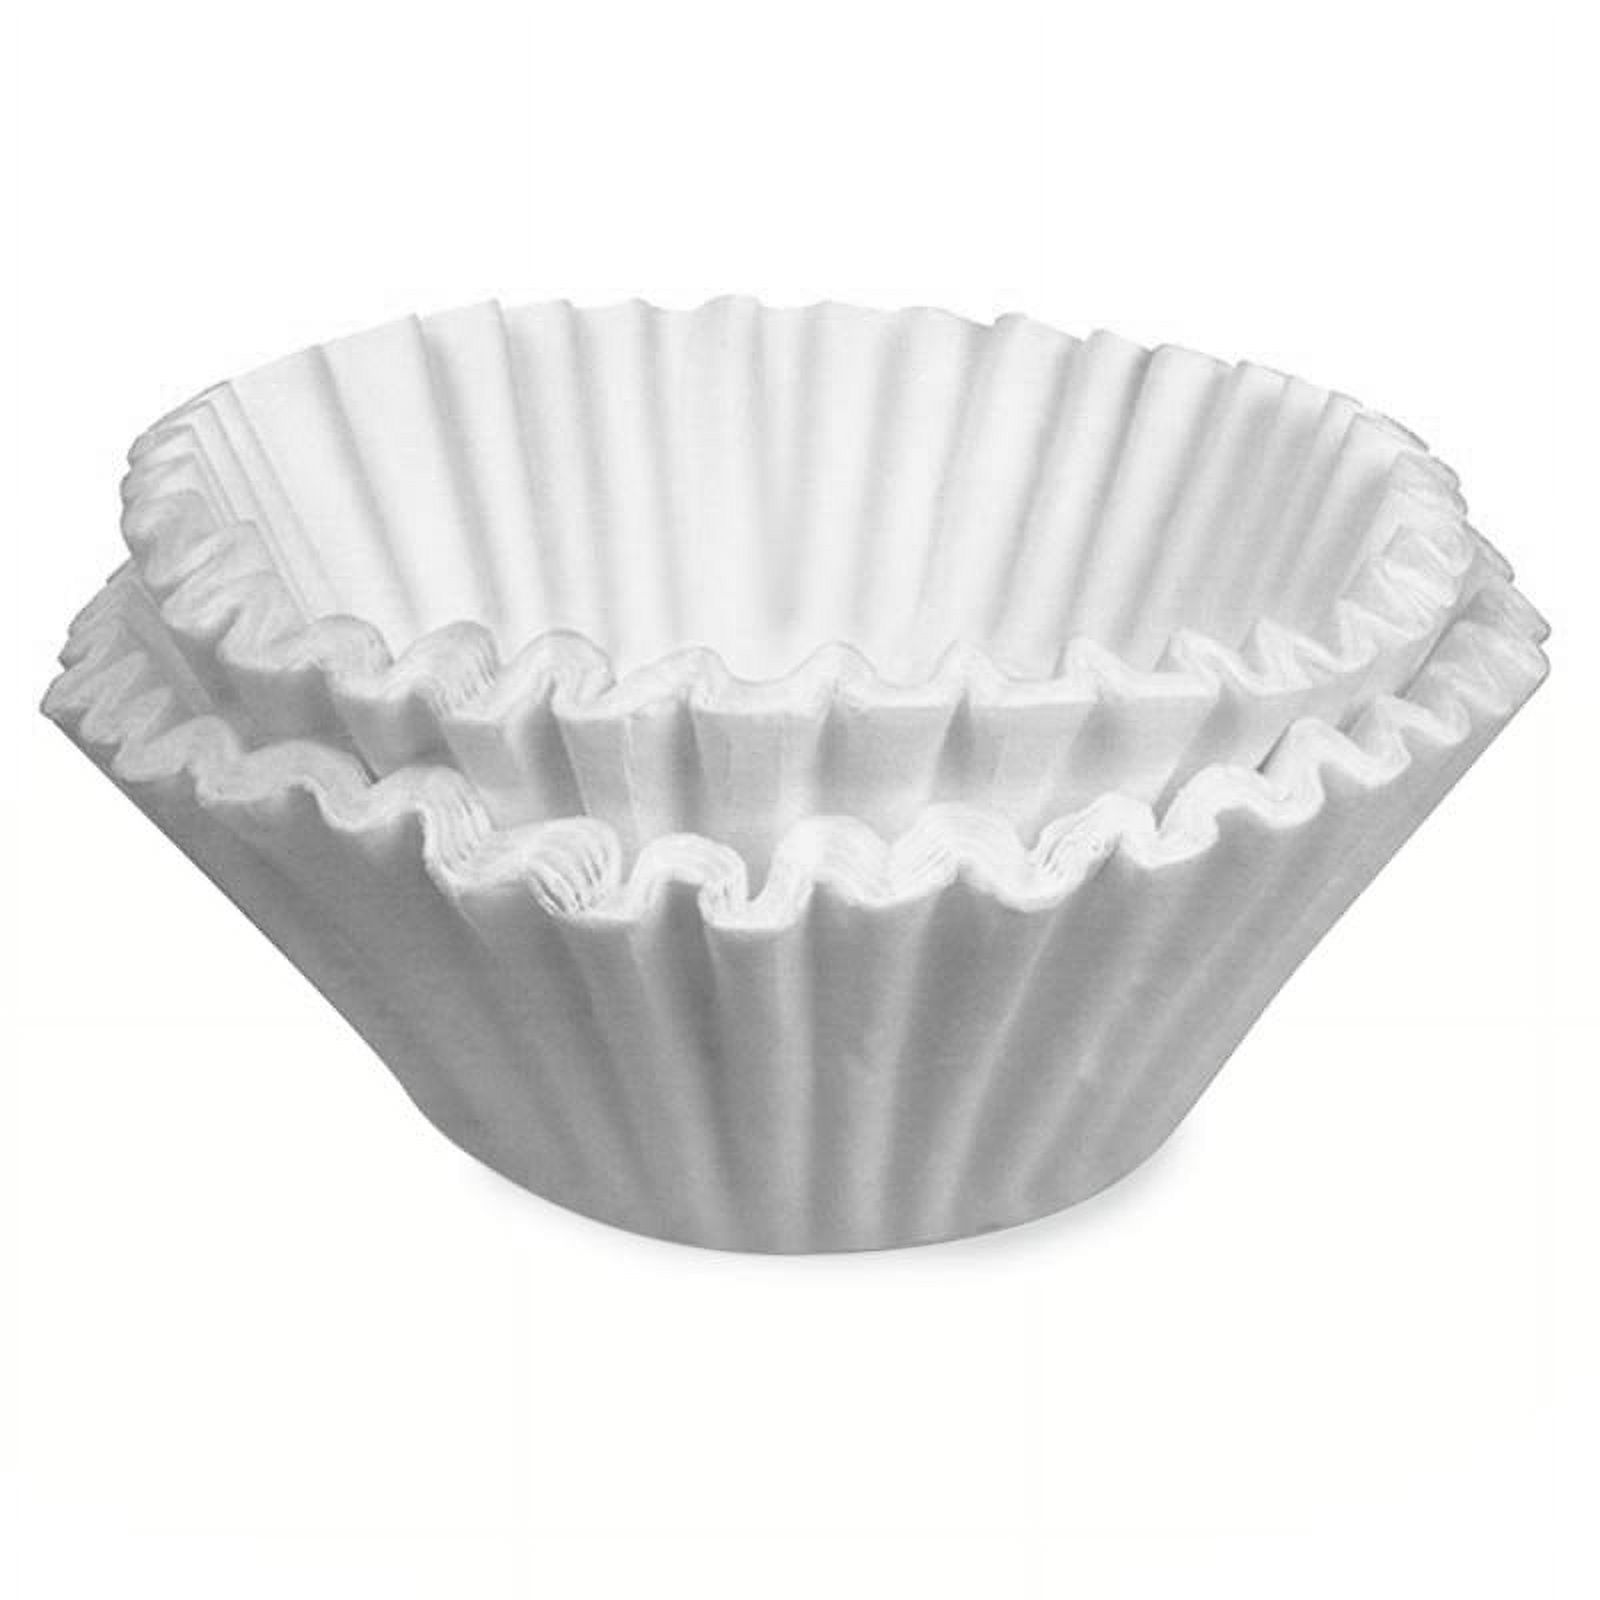 Bunn 8-12 Cup Premium Paper Coffee Filters, Flat - image 3 of 3